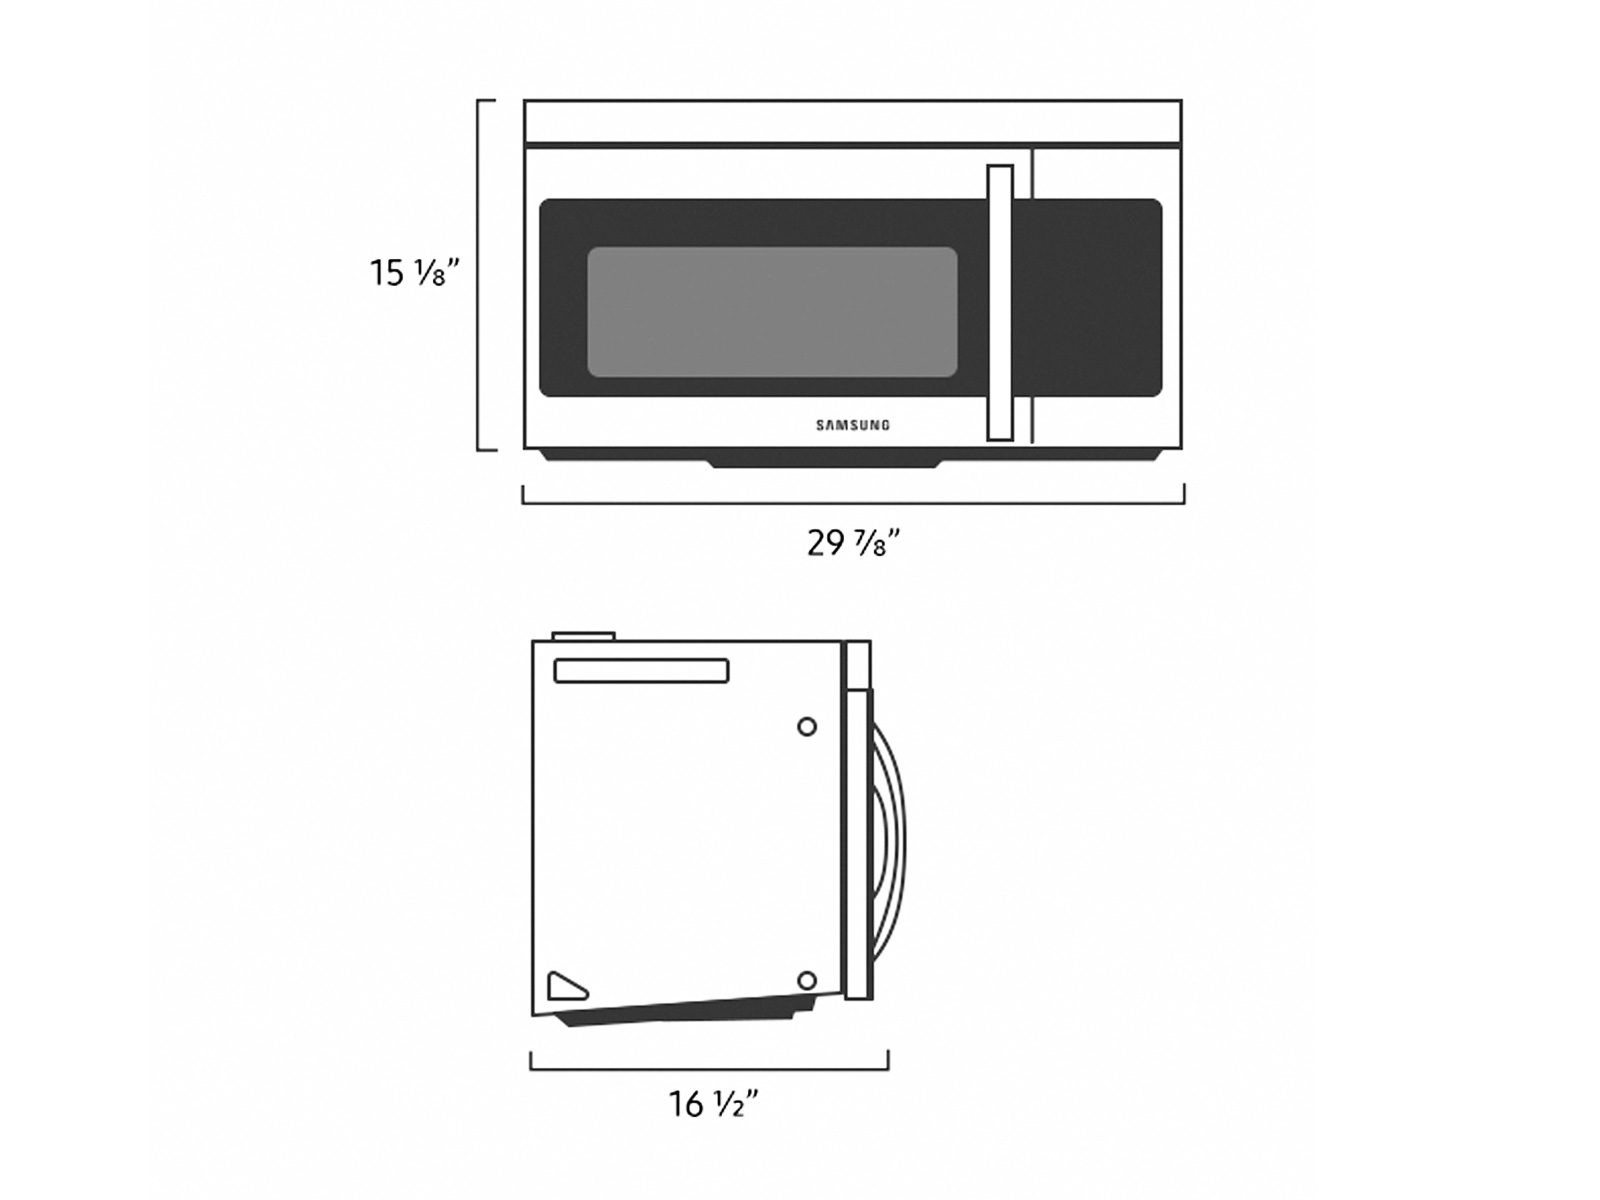 Thumbnail image of 1.6 cu. ft. Over-the-Range Microwave with Auto Cook in Stainless Steel